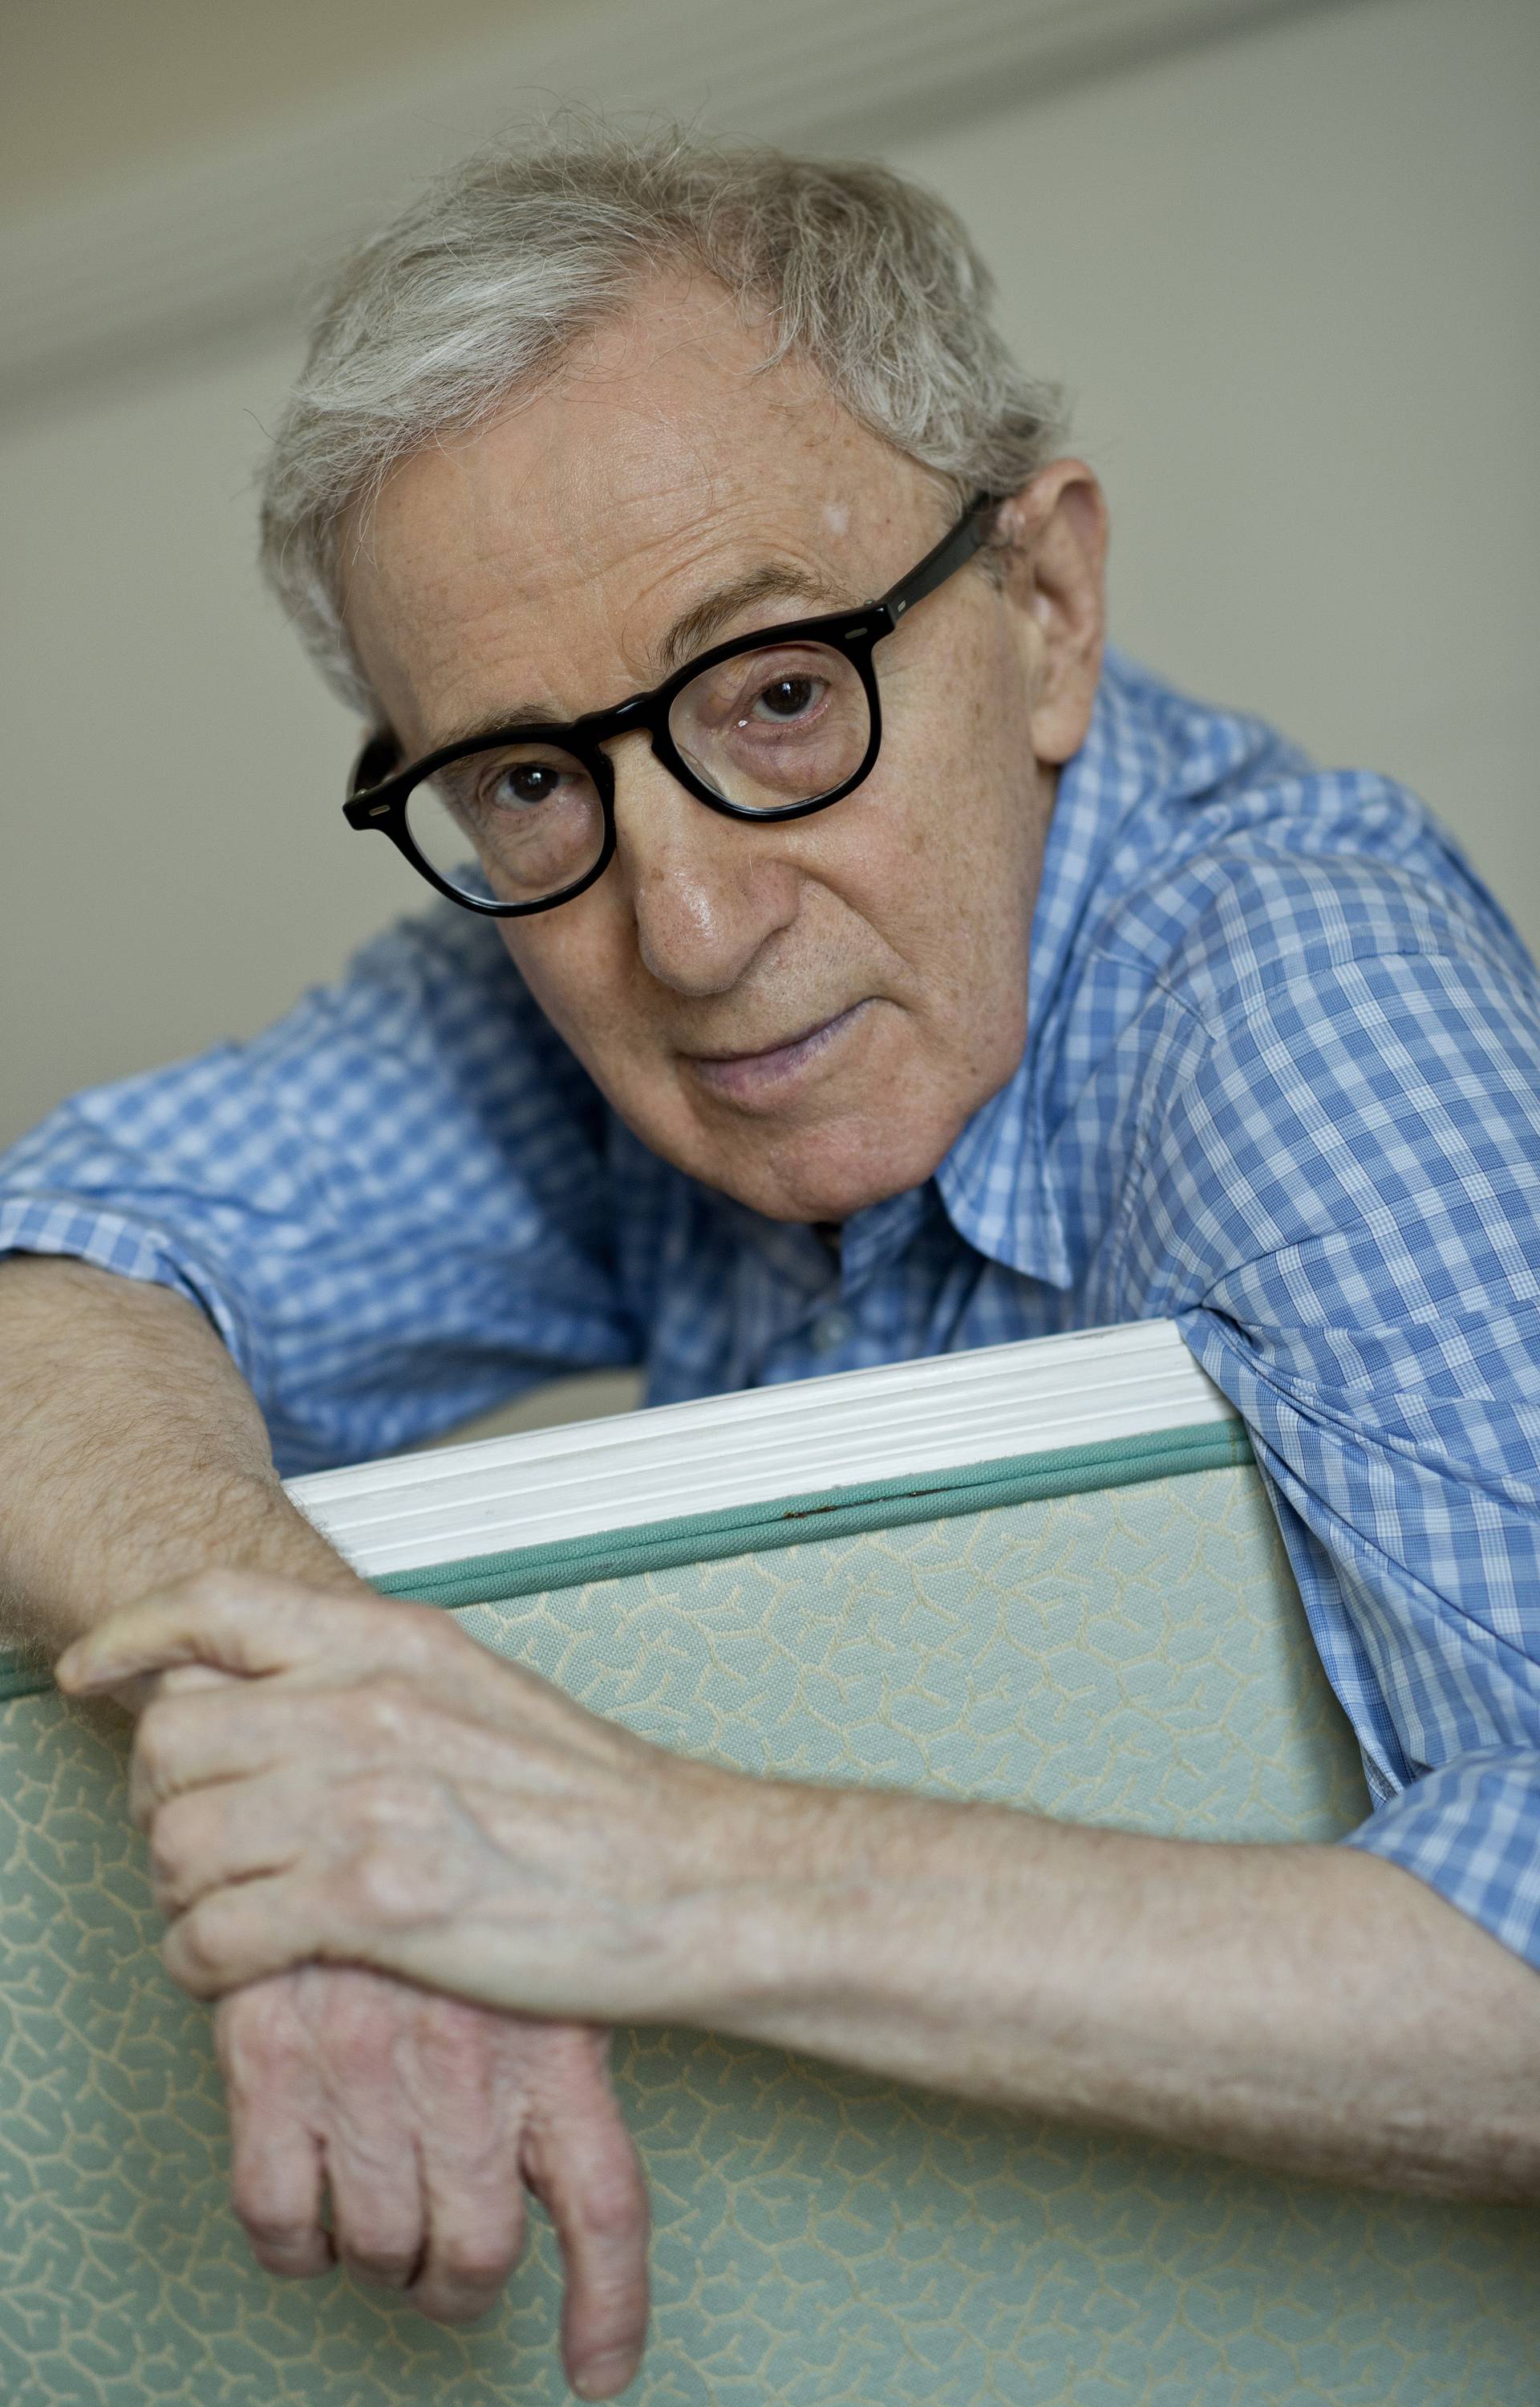 Exclusive - Cannes - Woody Allen Photo Session